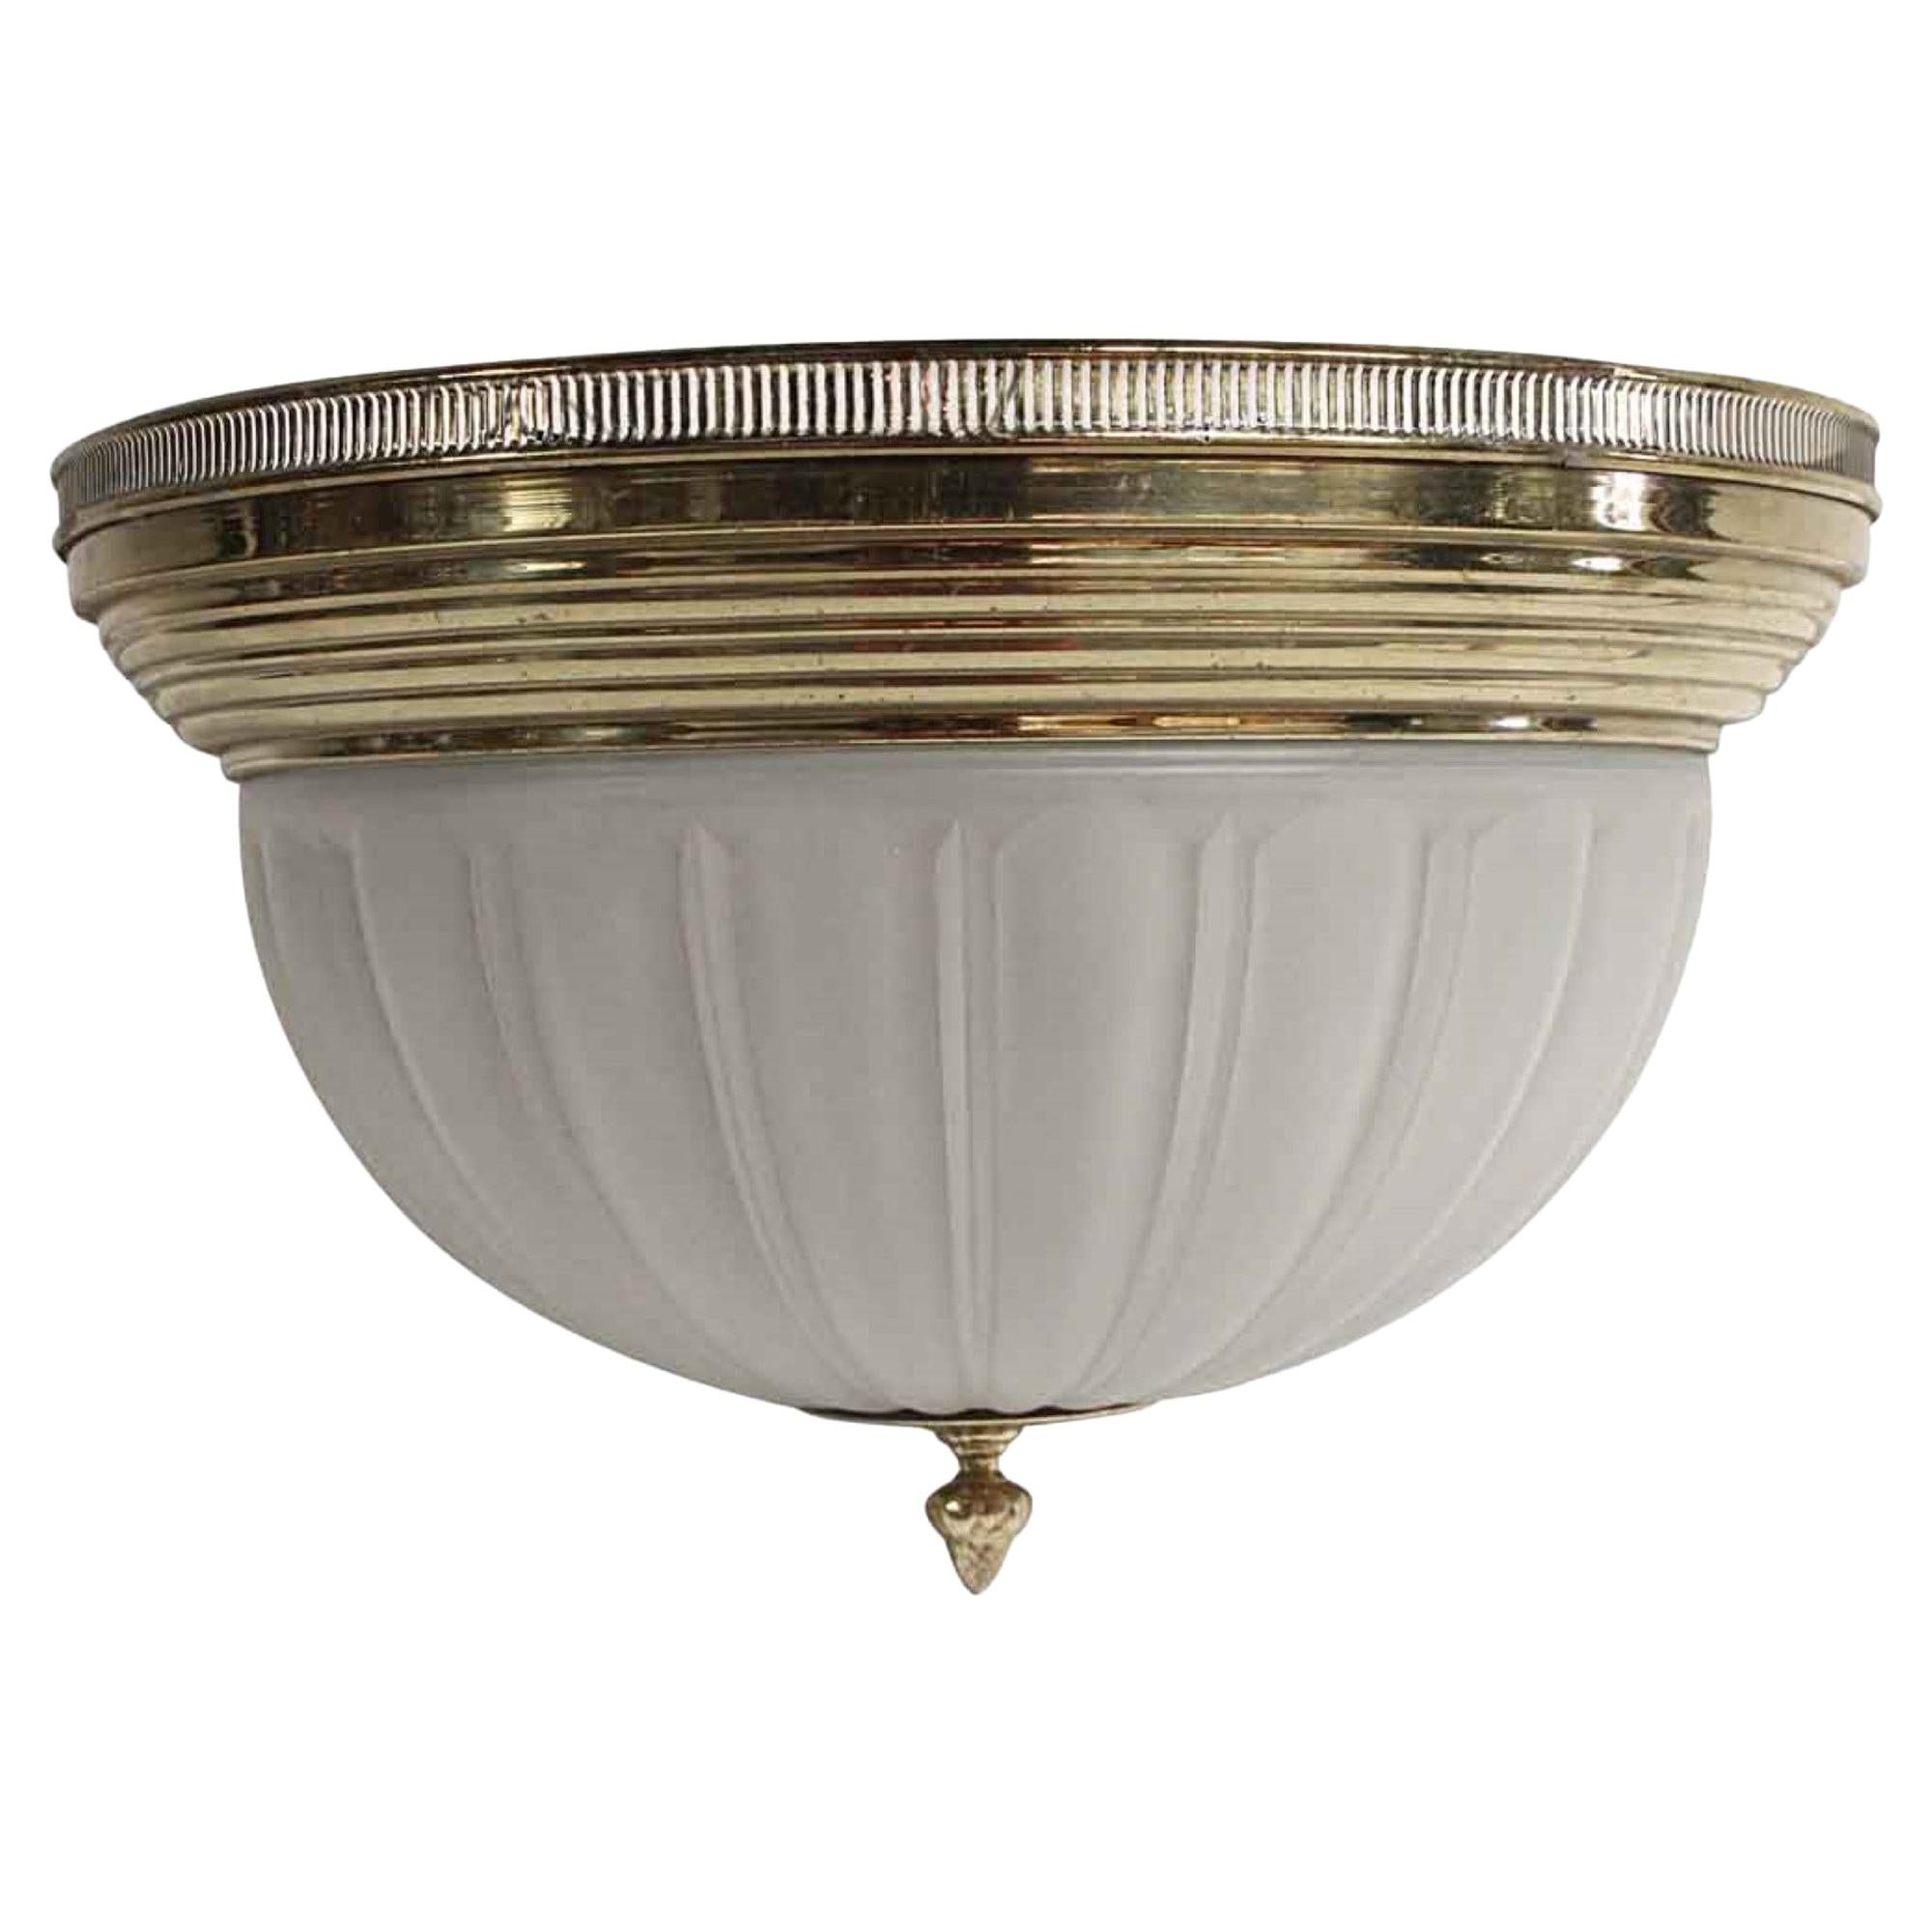 1990s Brass & Cast Glass Flush Mount Light from the Sutton Place Sheraton Hotel